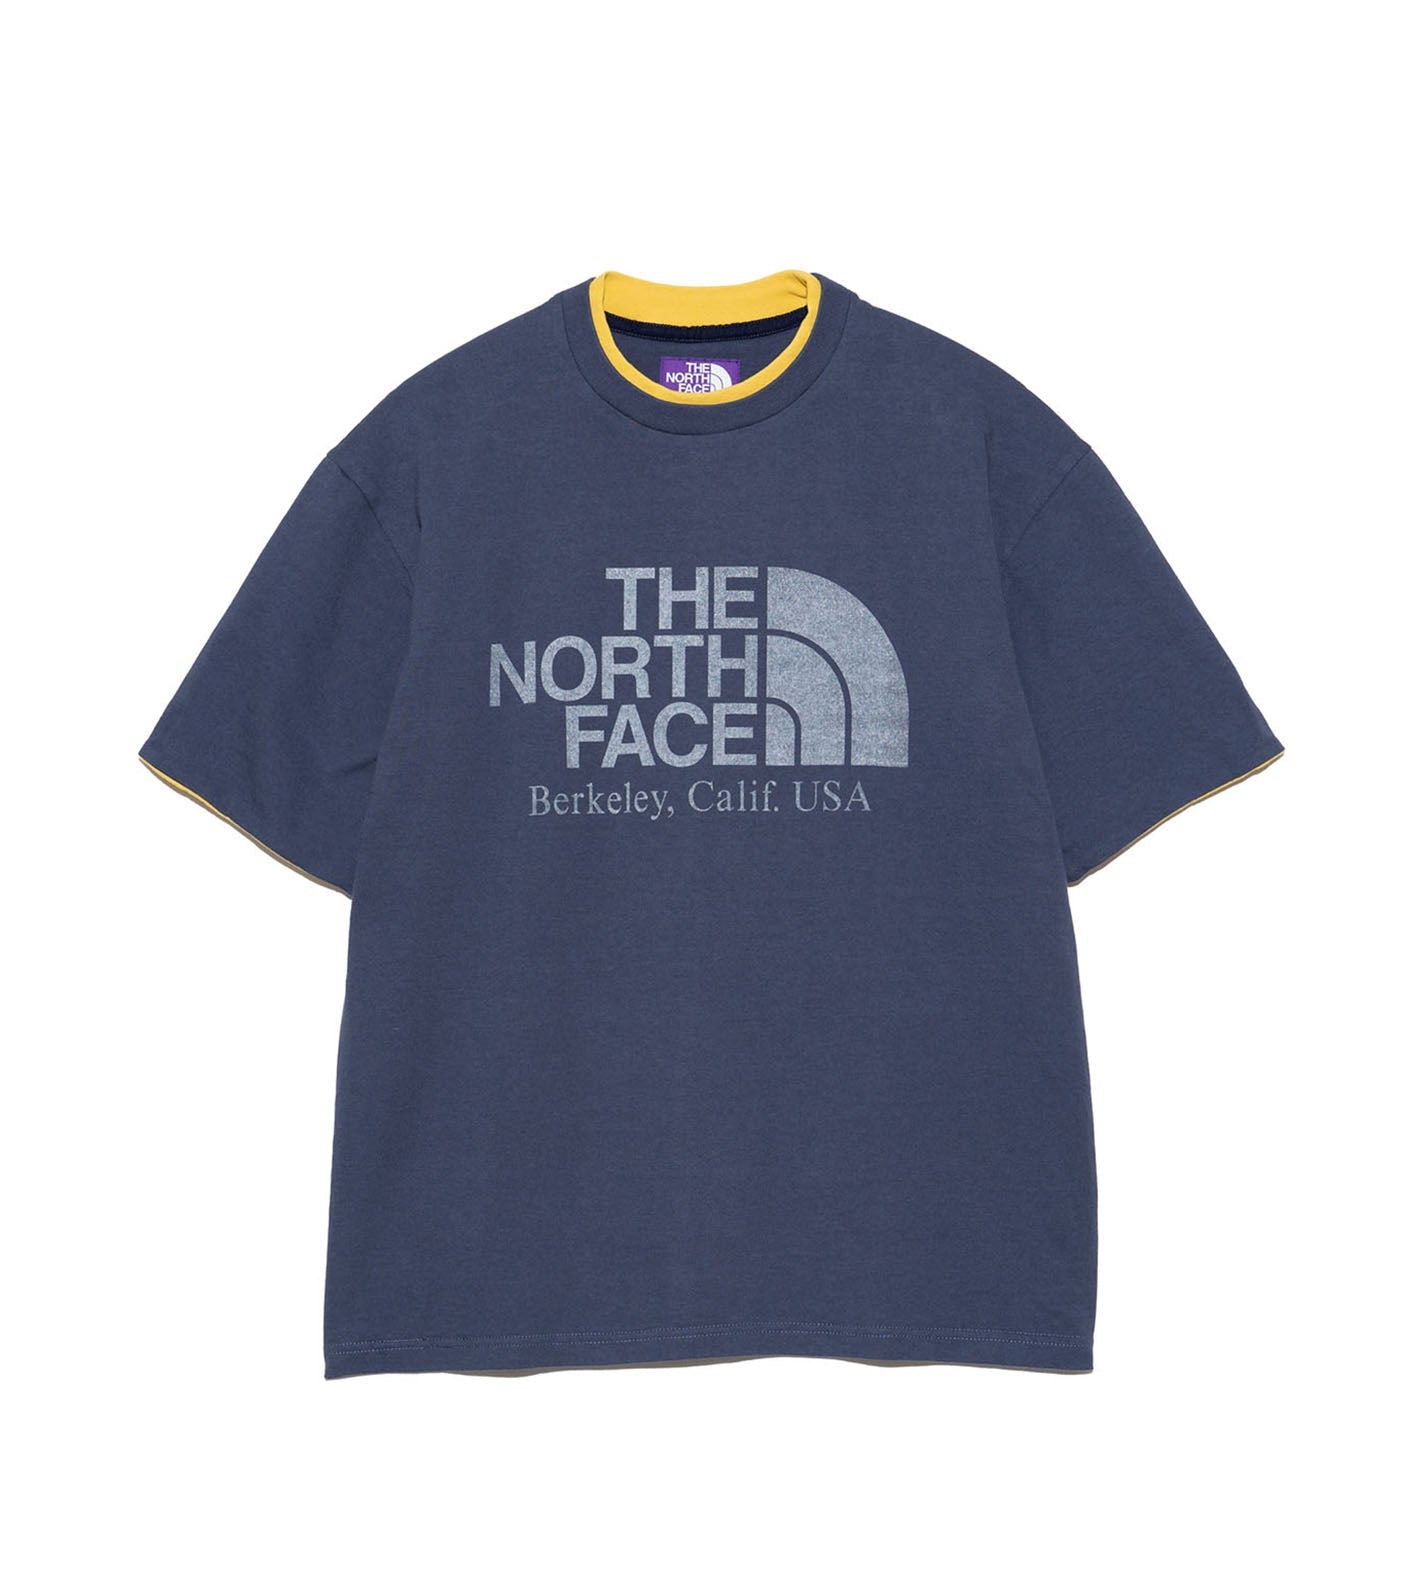 THE NORTH FACE PURPLE LABEL – TIME AFTER TIME